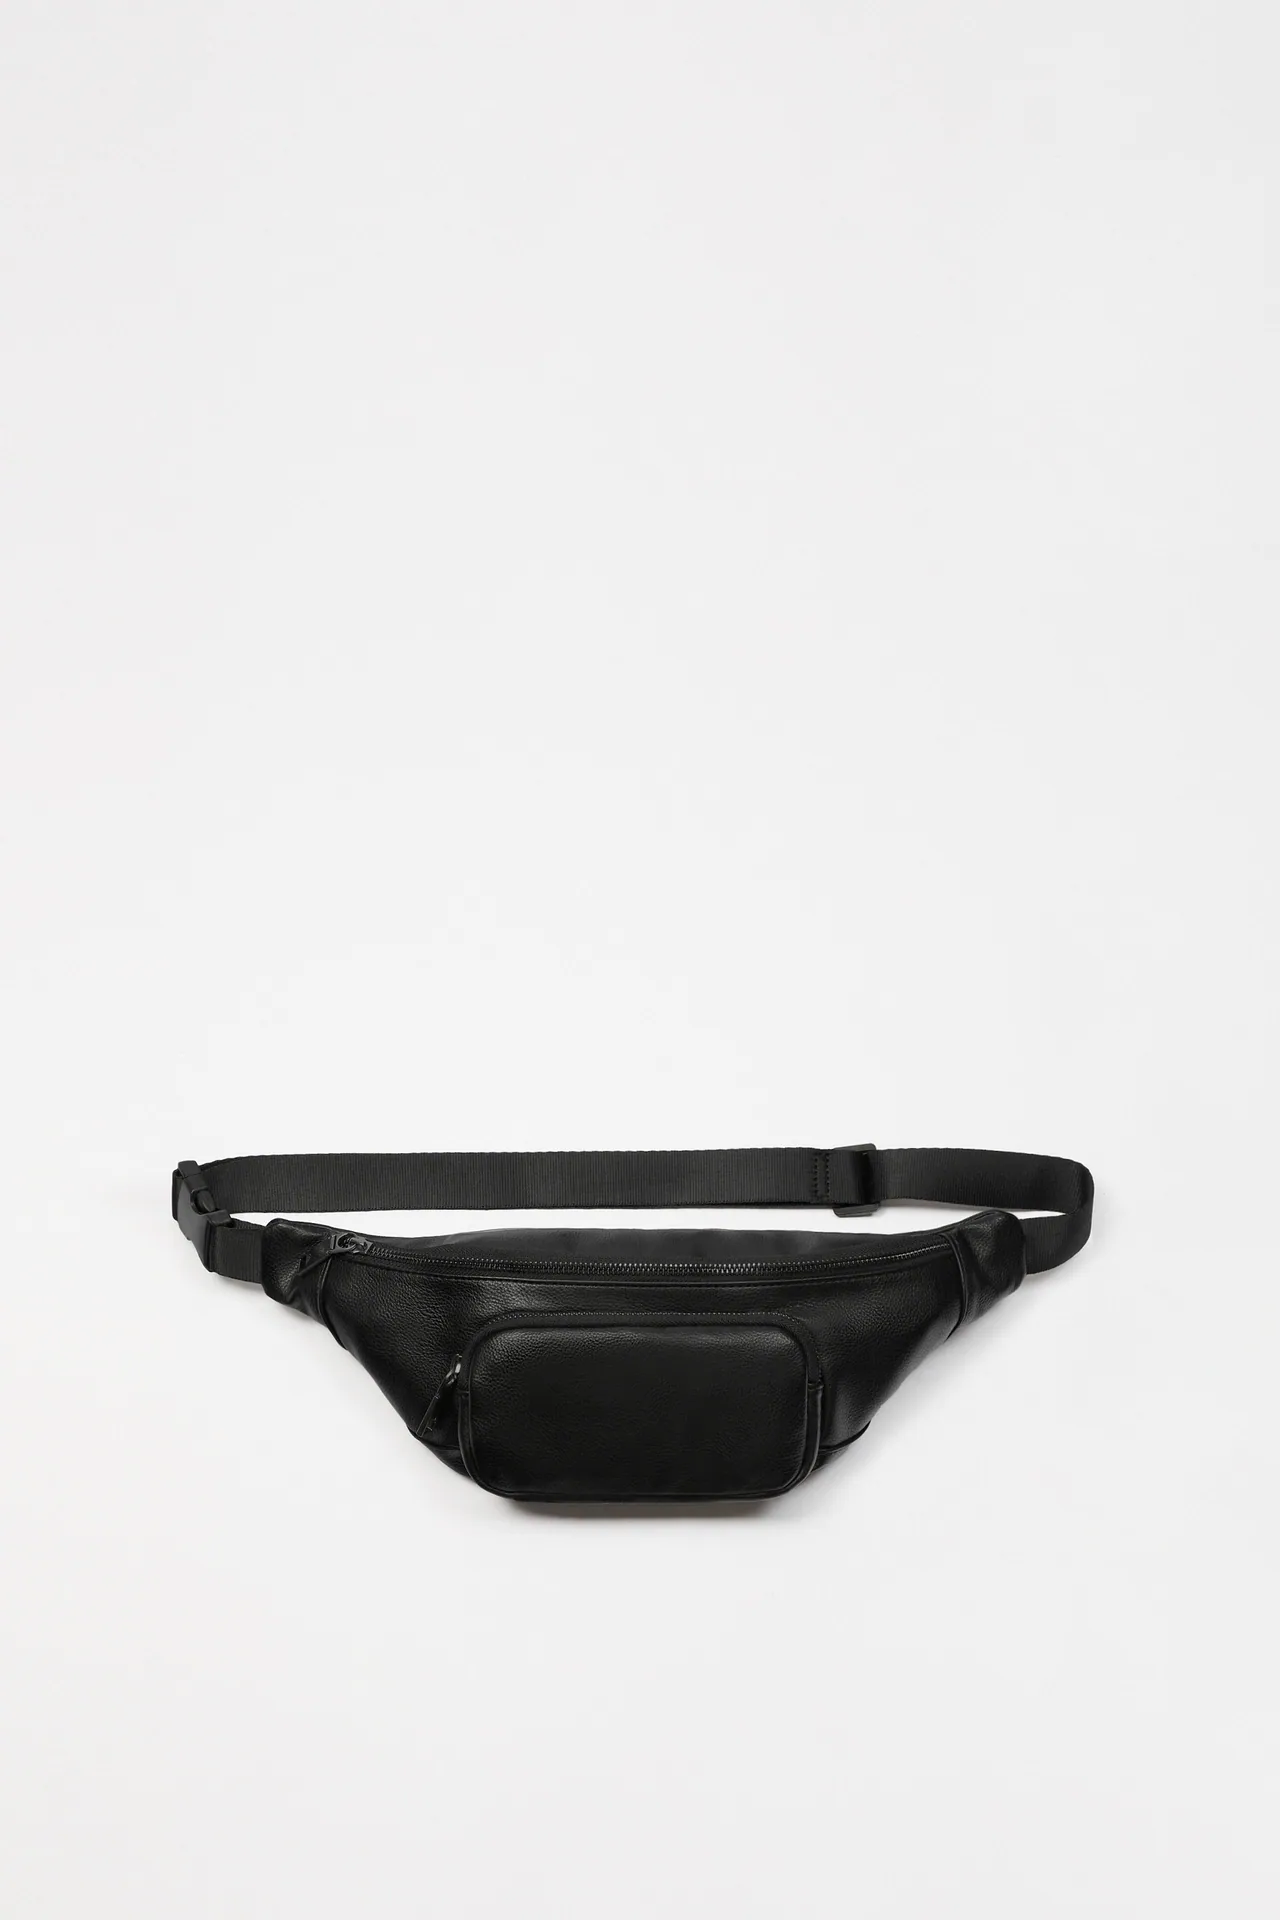 Sale > small black fanny pack > in stock